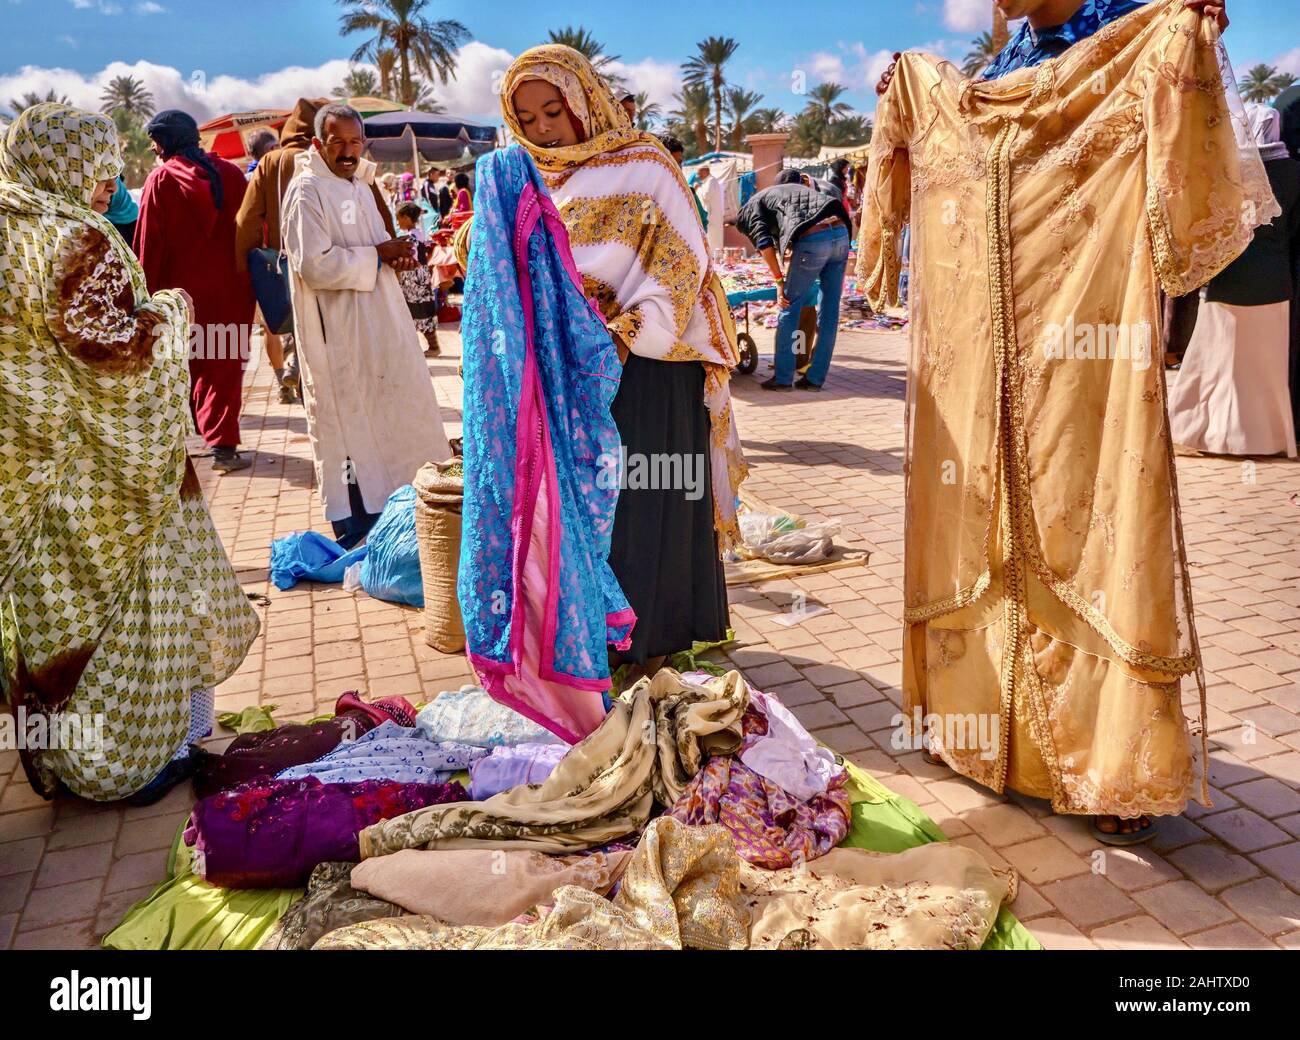 Tamegrout, Morocco - Oct 24, 2015. An outdoor market where Moroccan shoppers are looking at clothing being sold by a street vendor. Stock Photo